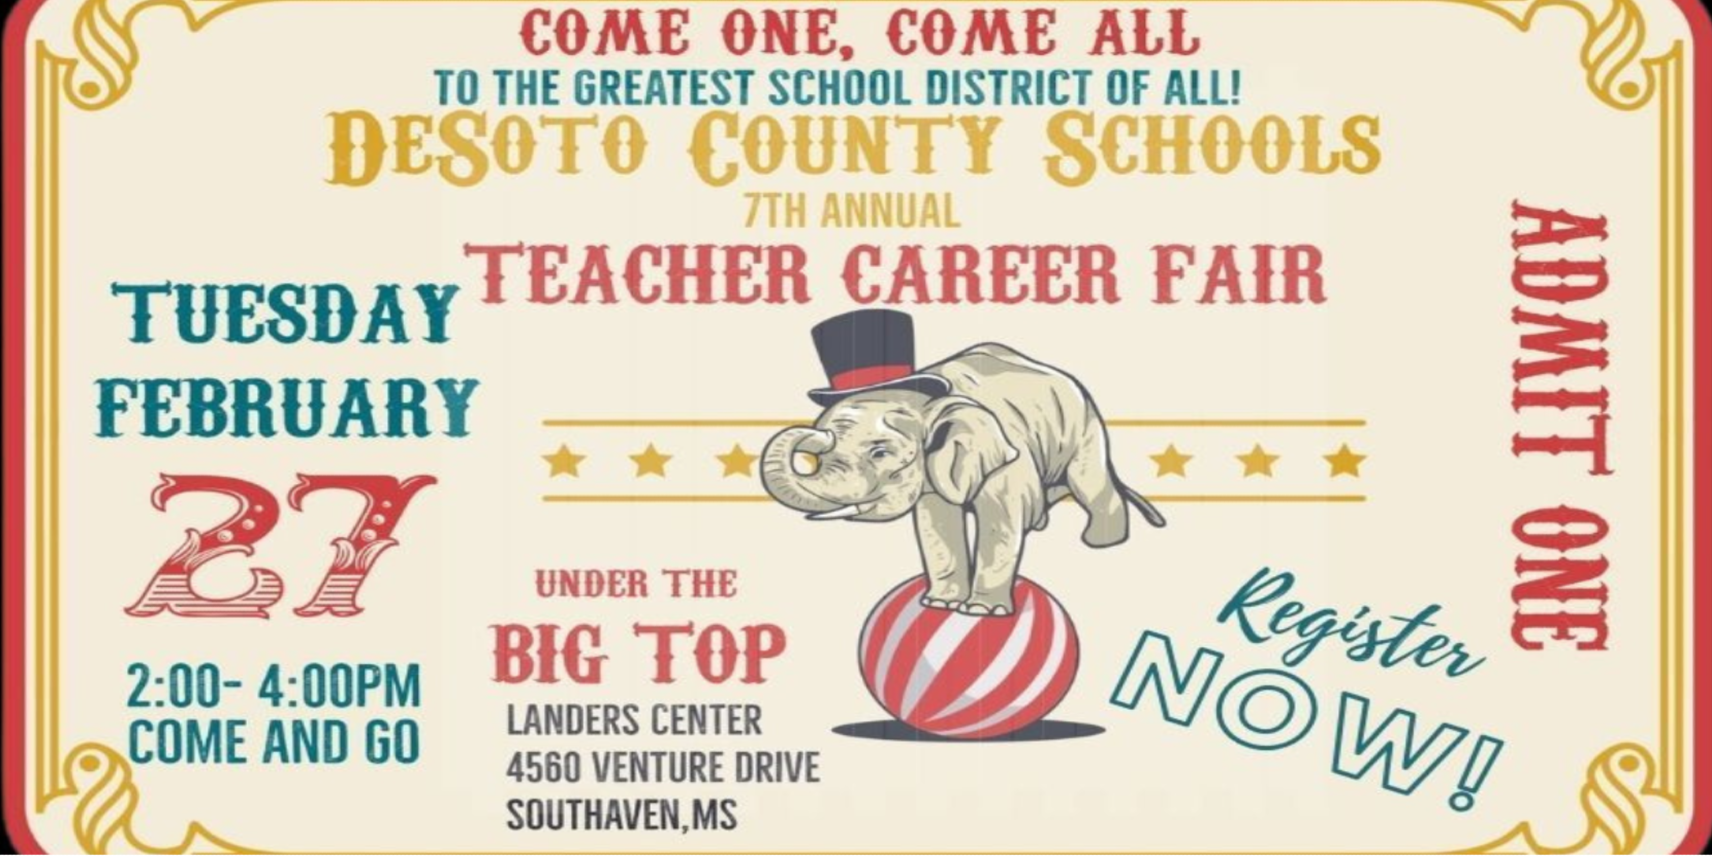 Come one, come all to the greatest school district of all! DeSoto County Schools 7th Annual Teacher Career Fair - Tuesday, February 27th from 2-4 pm (come and go) @ the Landers Center in Southaven, MS. REGISTER NOW!